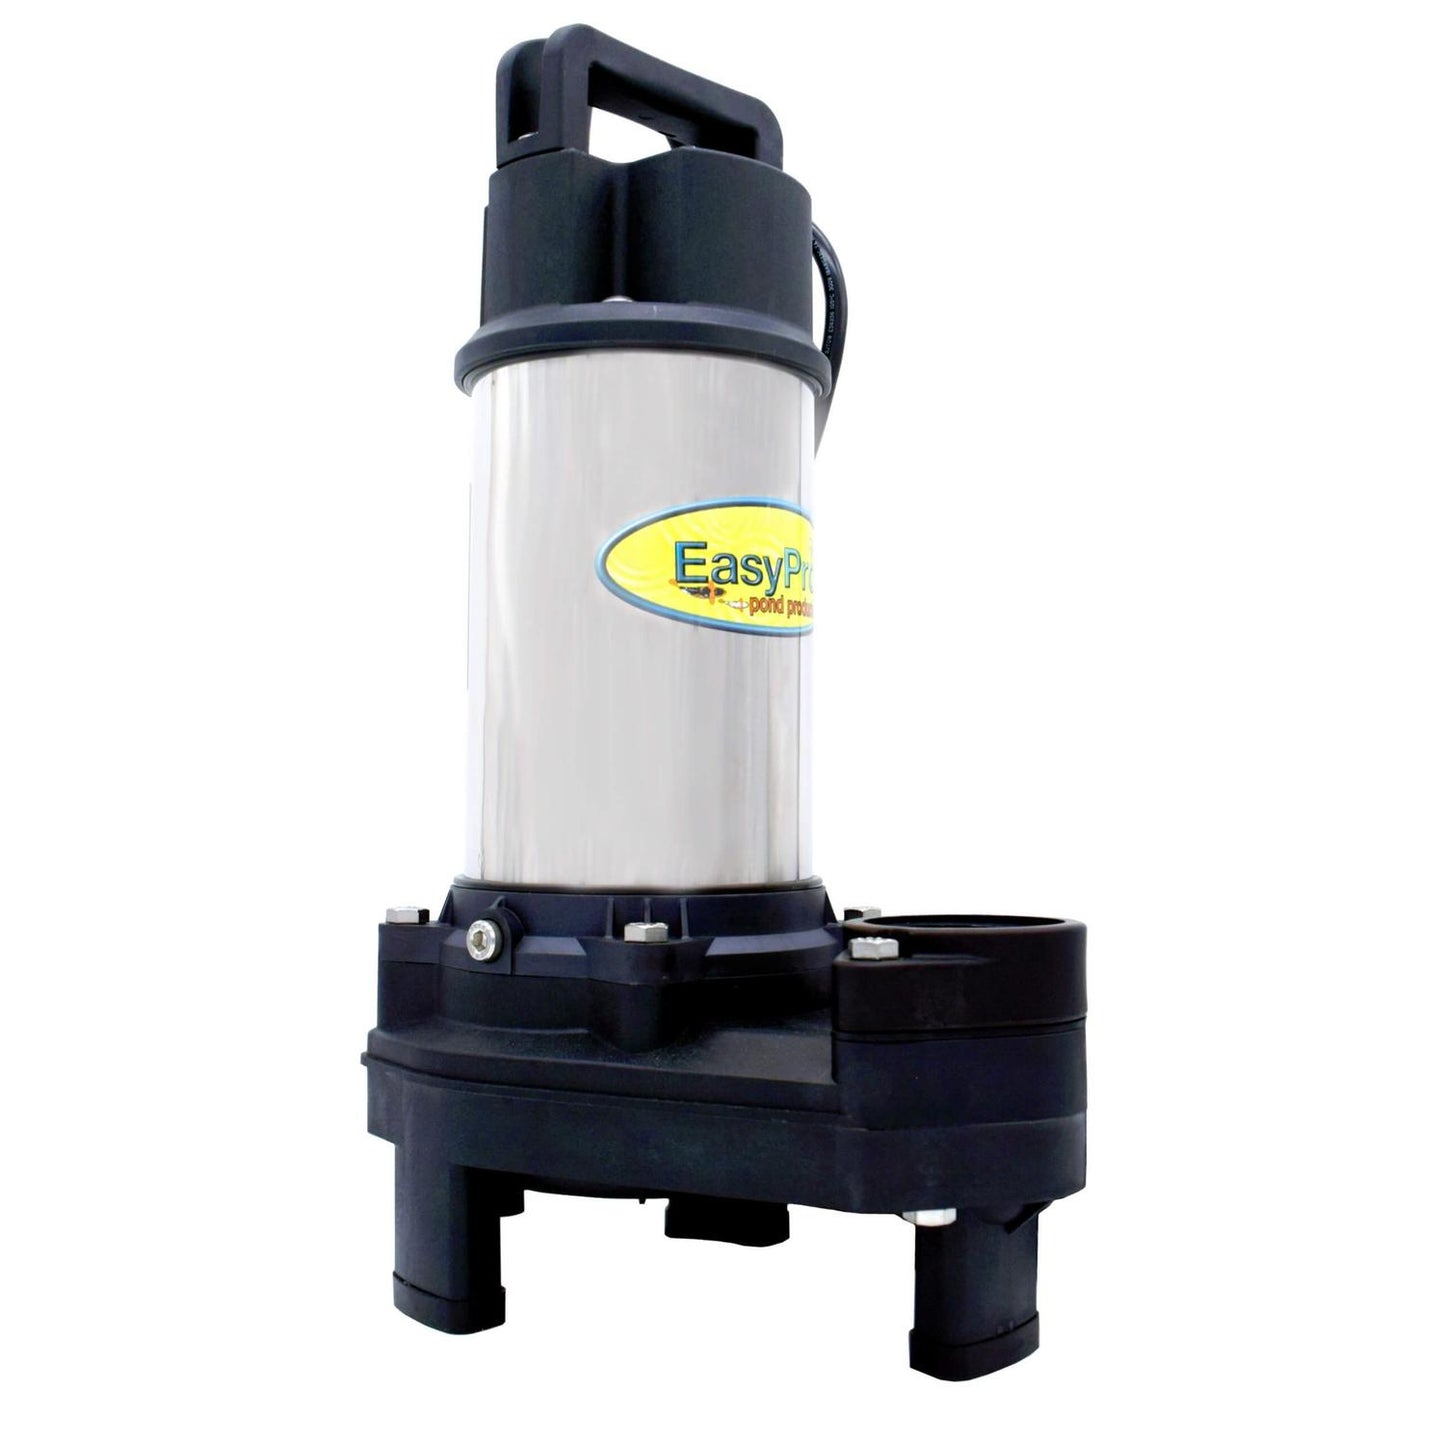 Easypro TH Series Stainless Steel Submersible Pond and Waterfall Pump